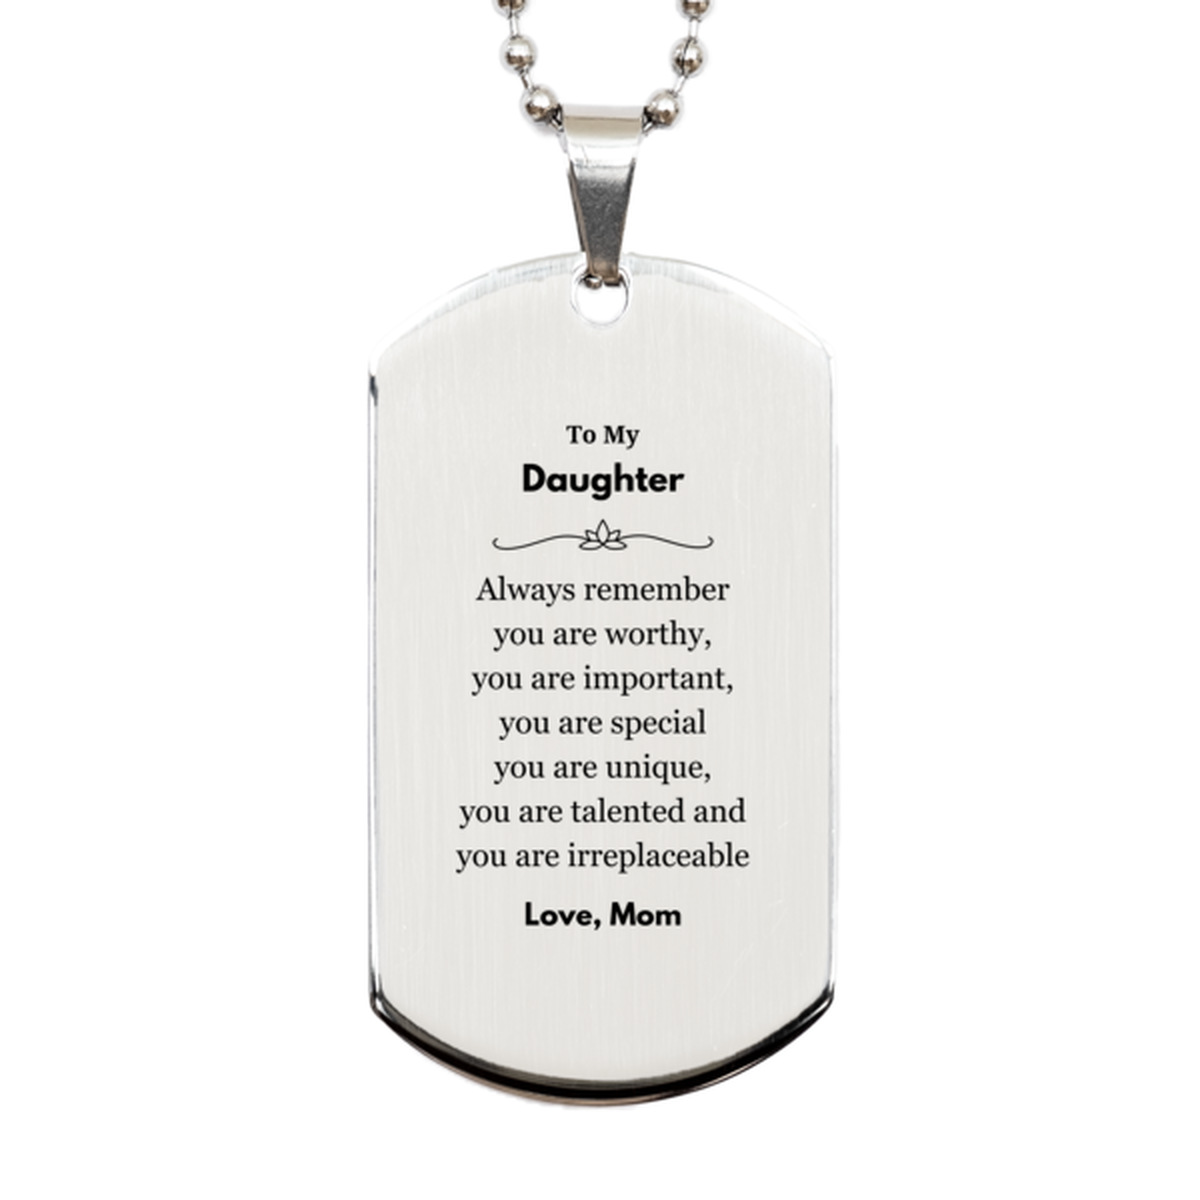 Daughter Birthday Gifts from Mom, Inspirational Silver Dog Tag for Daughter Christmas Graduation Gifts for Daughter Always remember you are worthy, you are important. Love, Mom